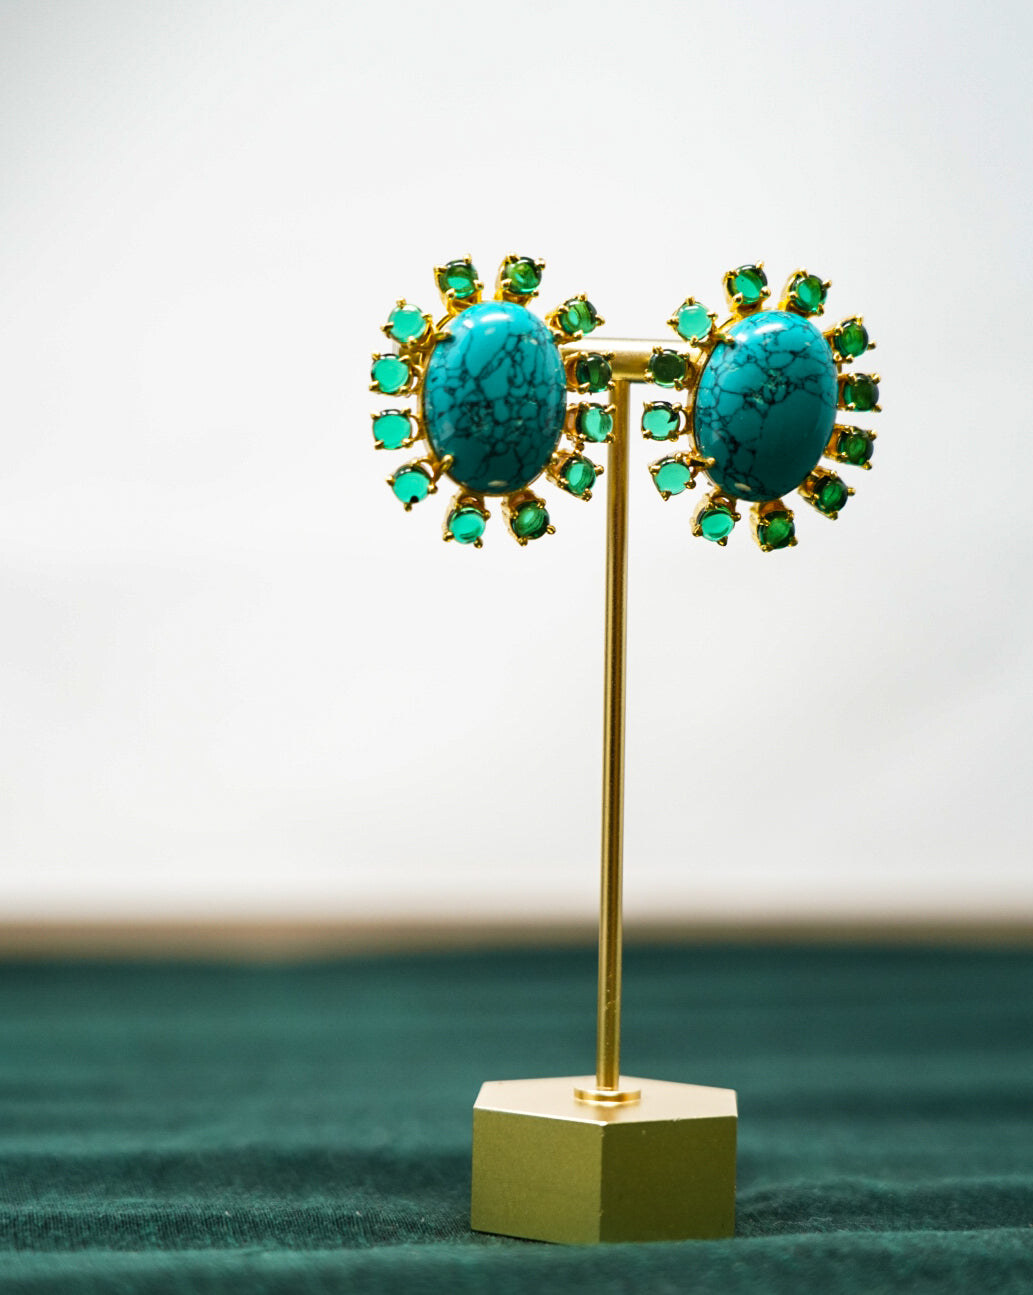 Gold Plated Blue Stud Earrings